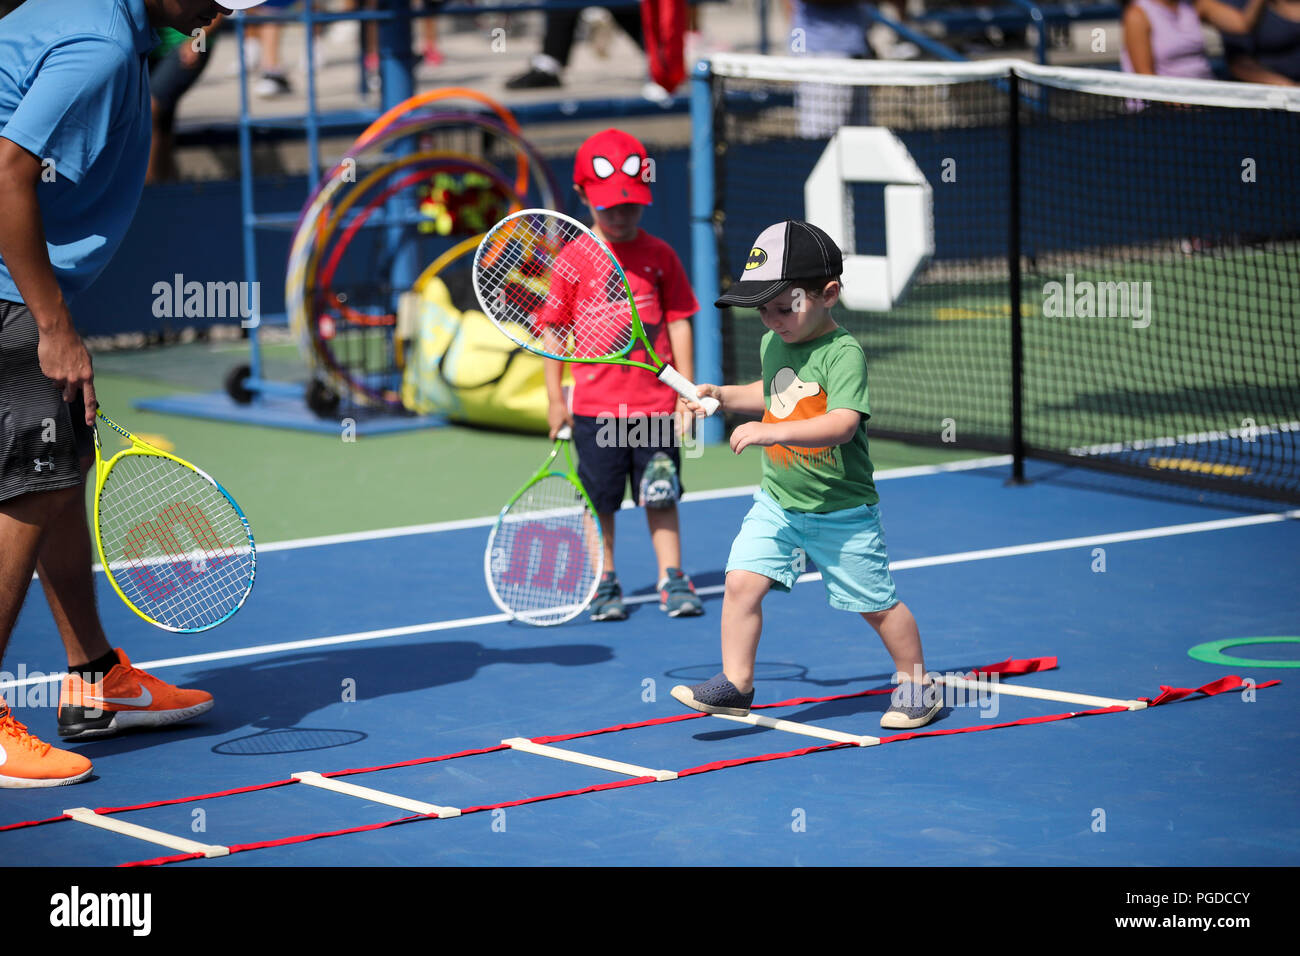 New York, USA. 25th Aug, 2018. Kids play tennis games during the Arthur Ashe Kids Day of the U.S. Open in New York, the United States, Aug